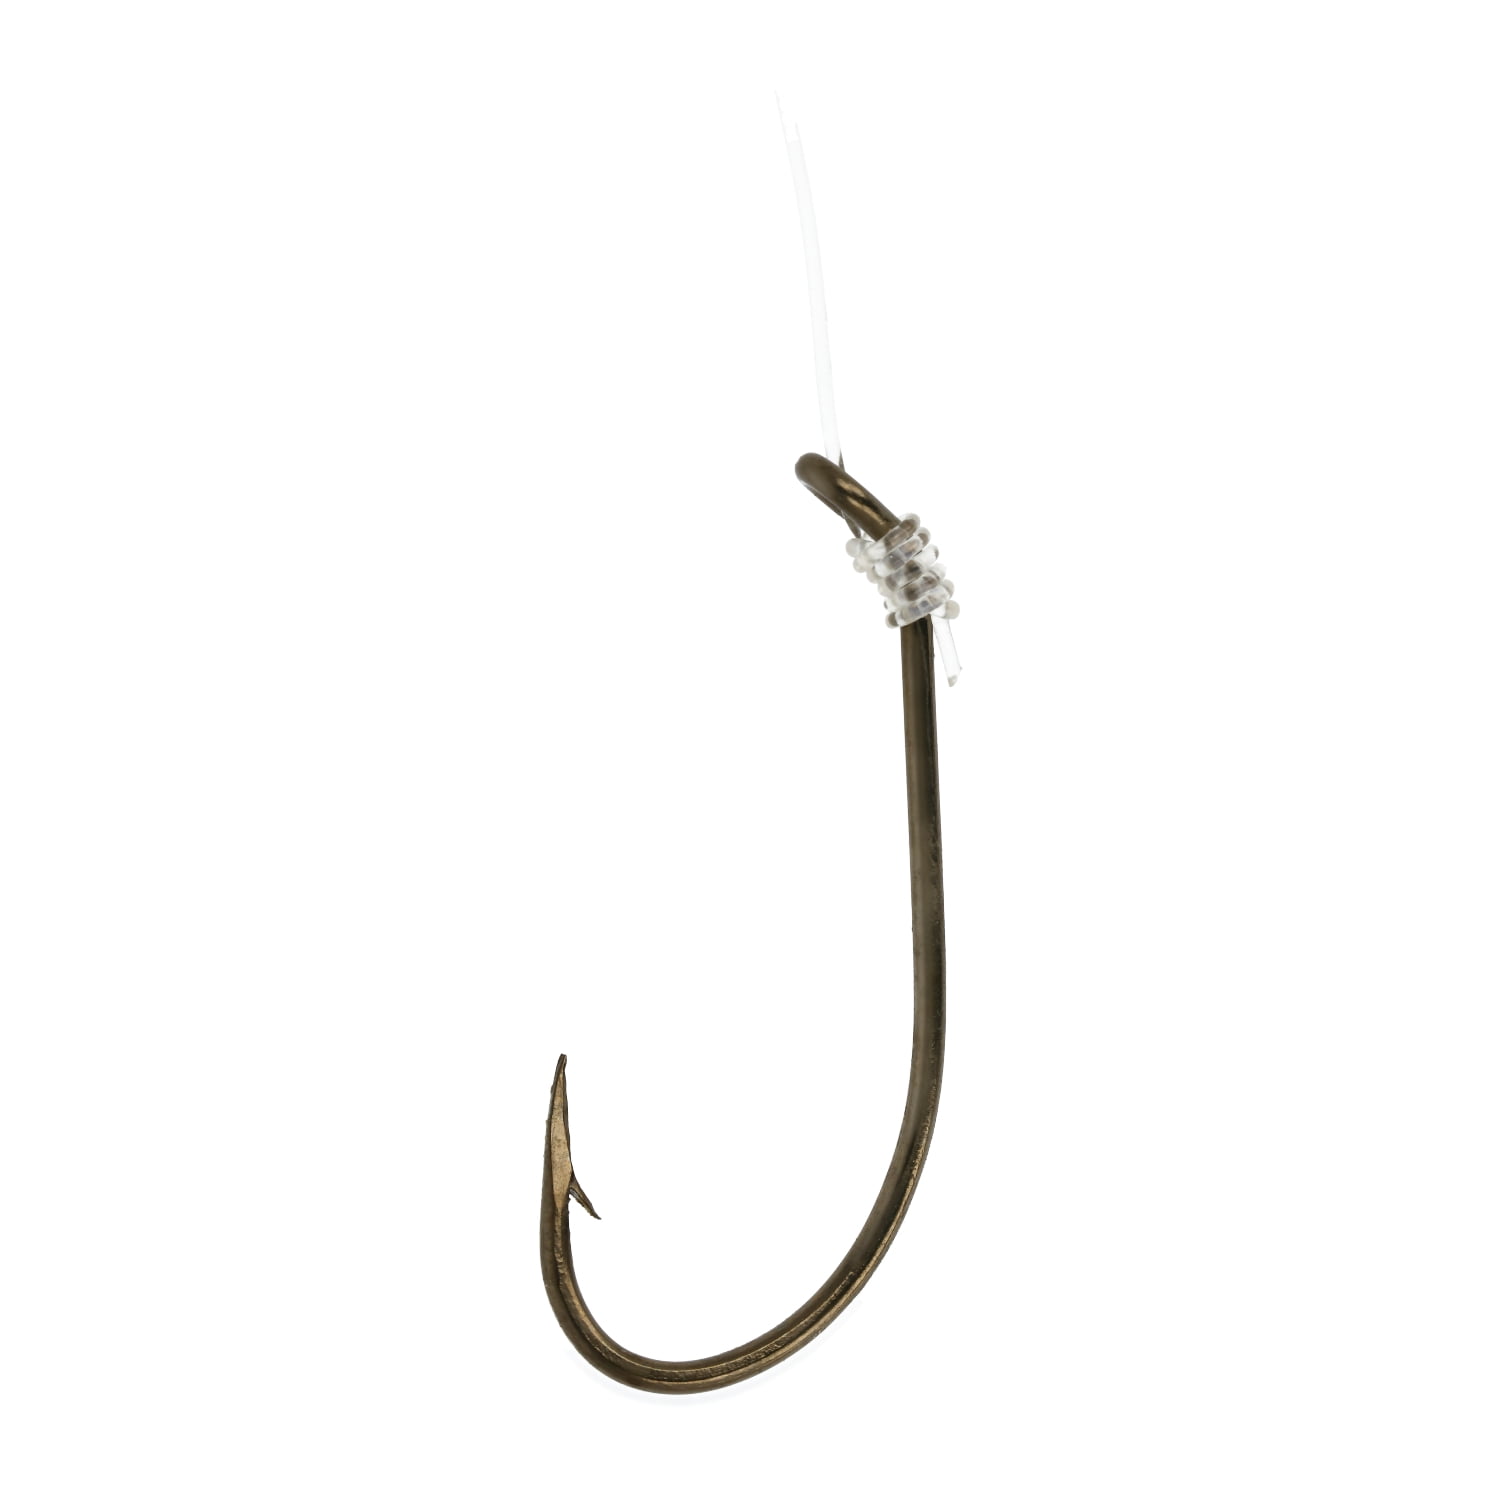 Eagle Claw 031H-8 Plain Shank Snell Fish Hook, Size 8 